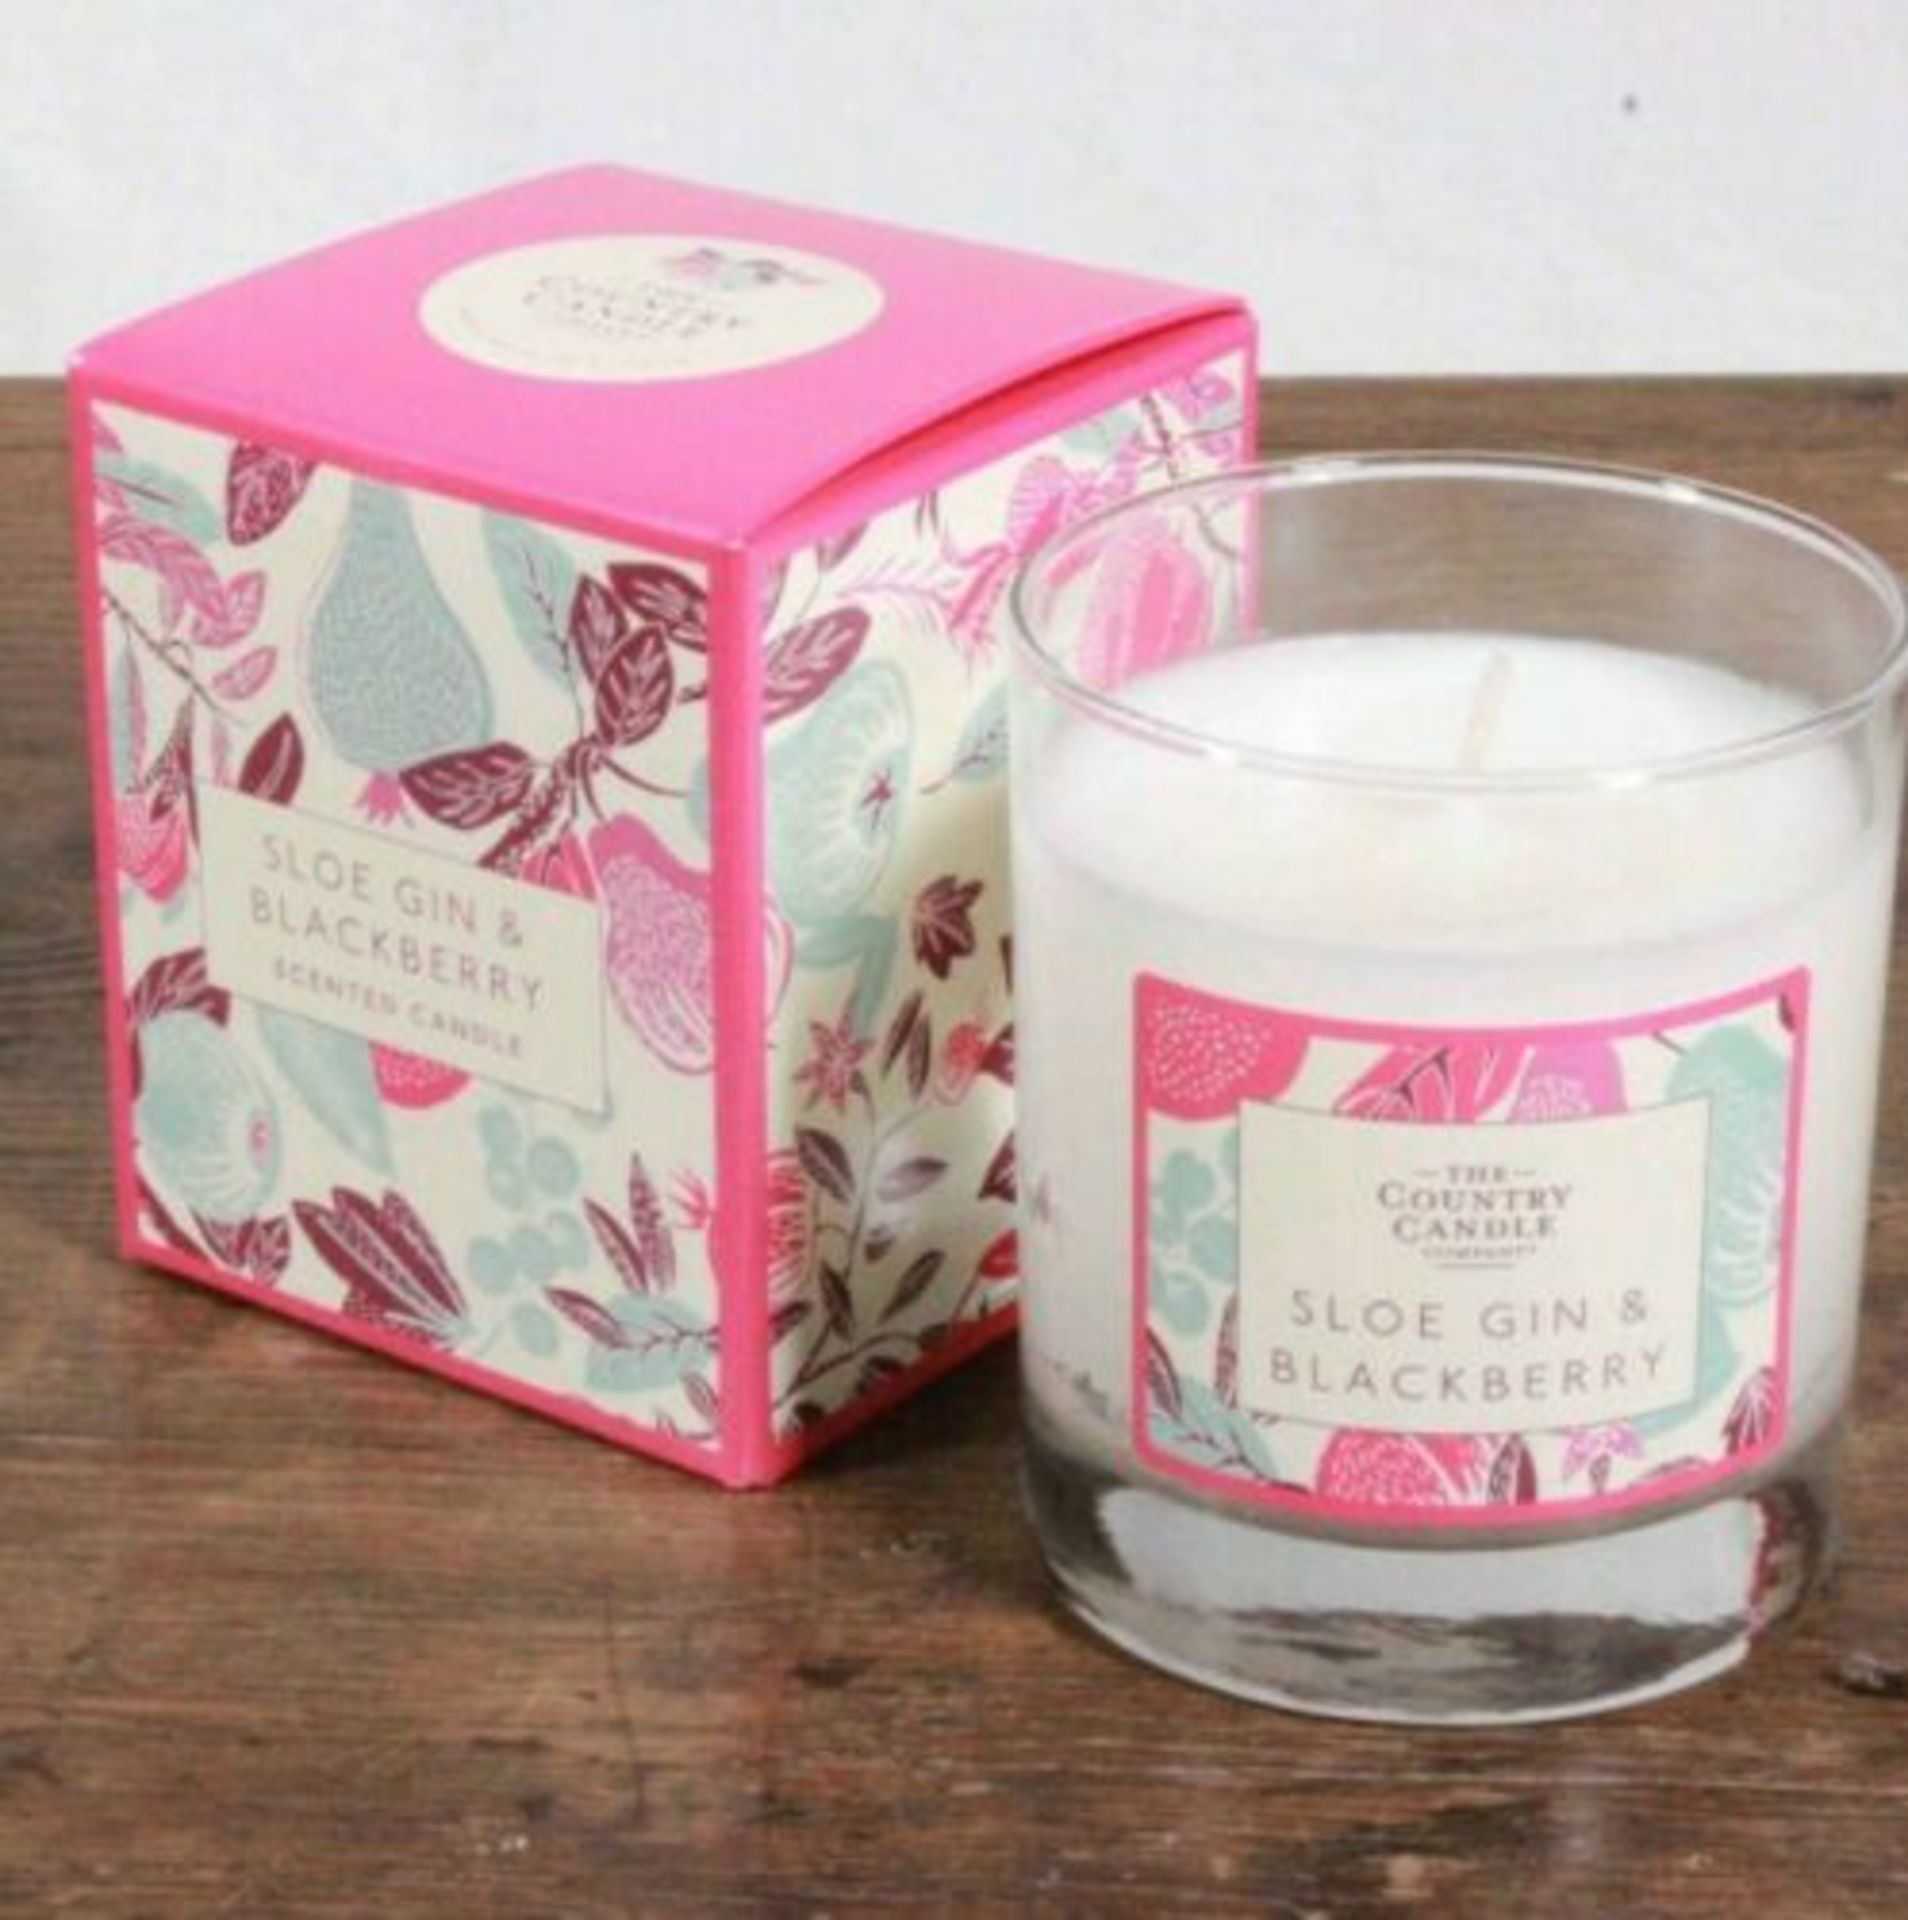 3 X The Country Candle Company Sloe Gin & Blackberry Glass Candle Gift Box